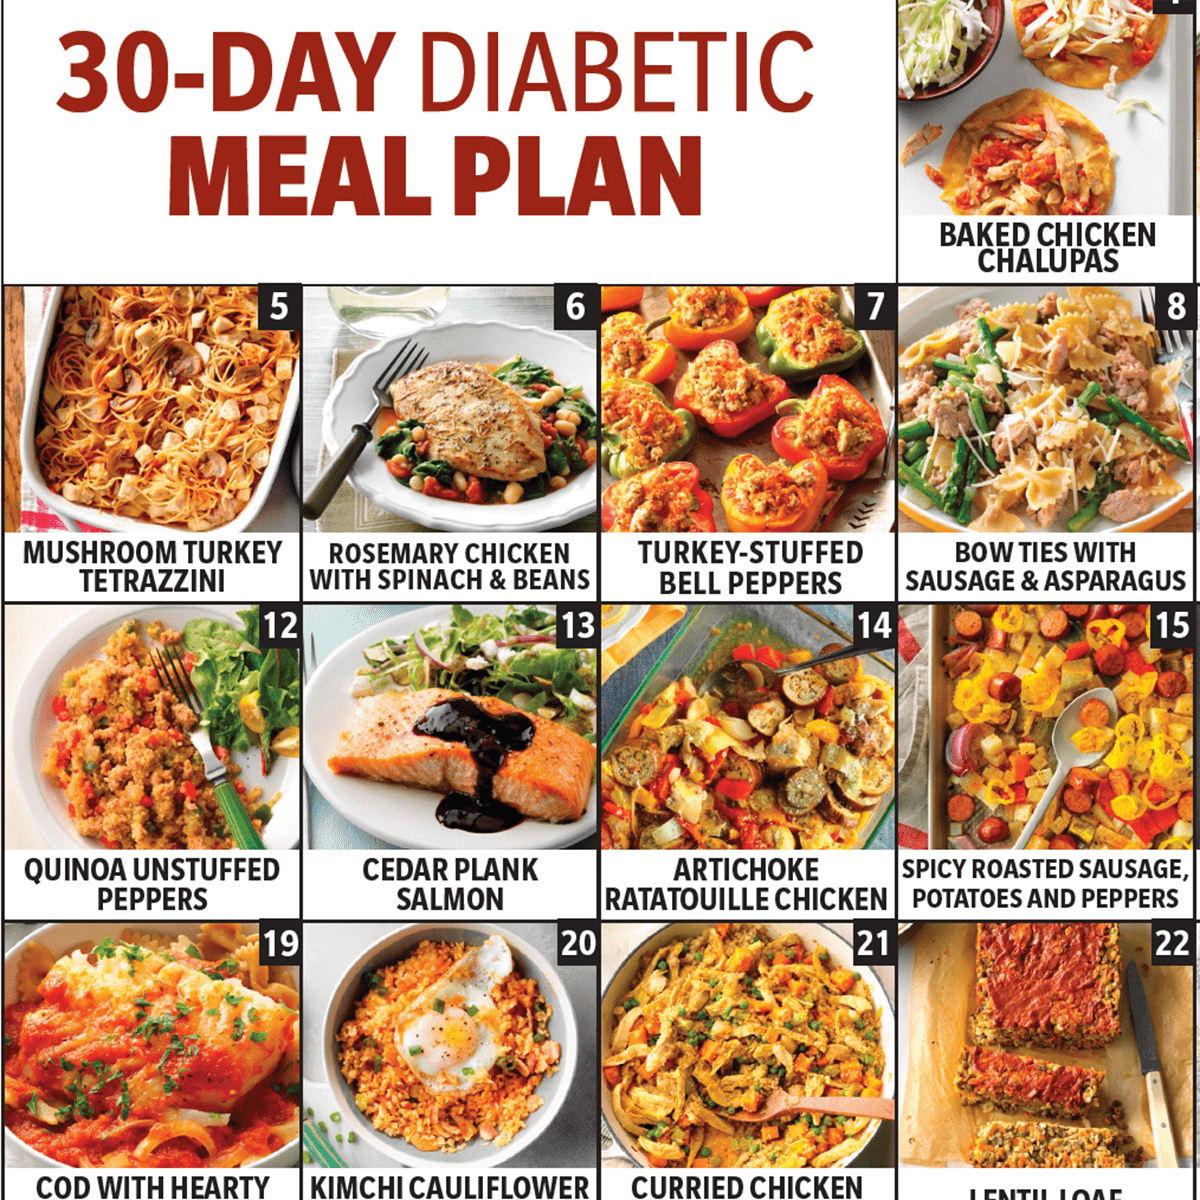 Gluten Free Diabetic Meal Plan - Best Culinary and Food